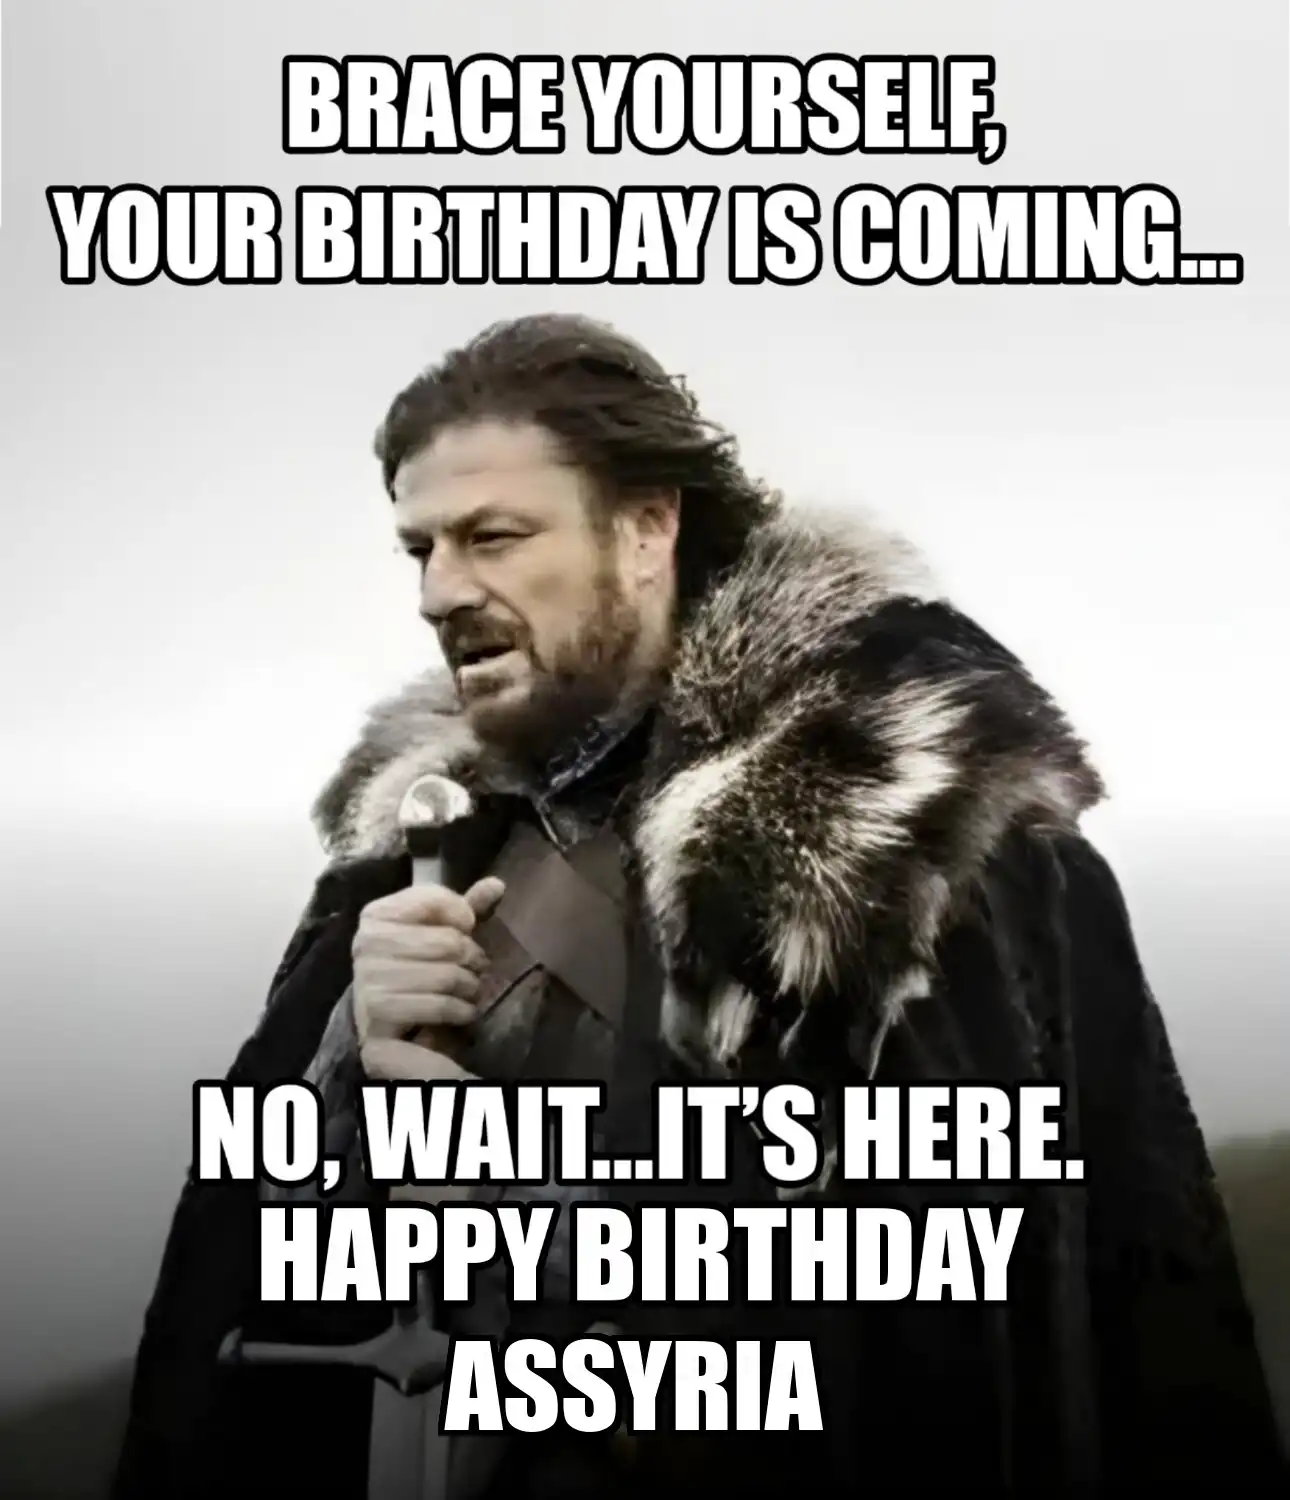 Happy Birthday Assyria Brace Yourself Your Birthday Is Coming Meme